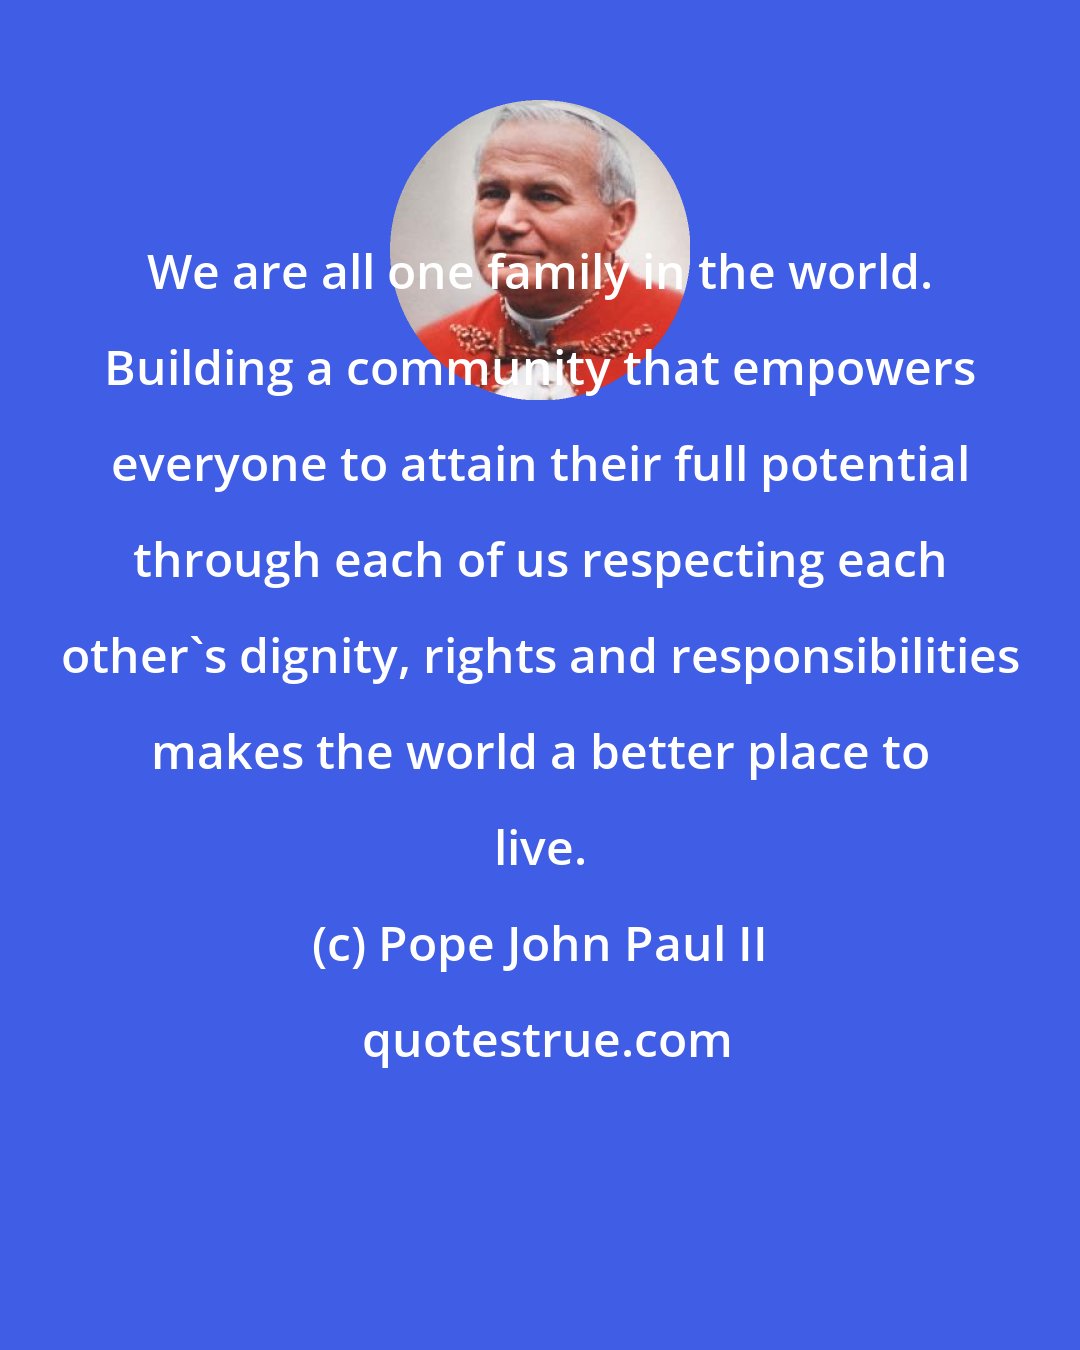 Pope John Paul II: We are all one family in the world. Building a community that empowers everyone to attain their full potential through each of us respecting each other's dignity, rights and responsibilities makes the world a better place to live.